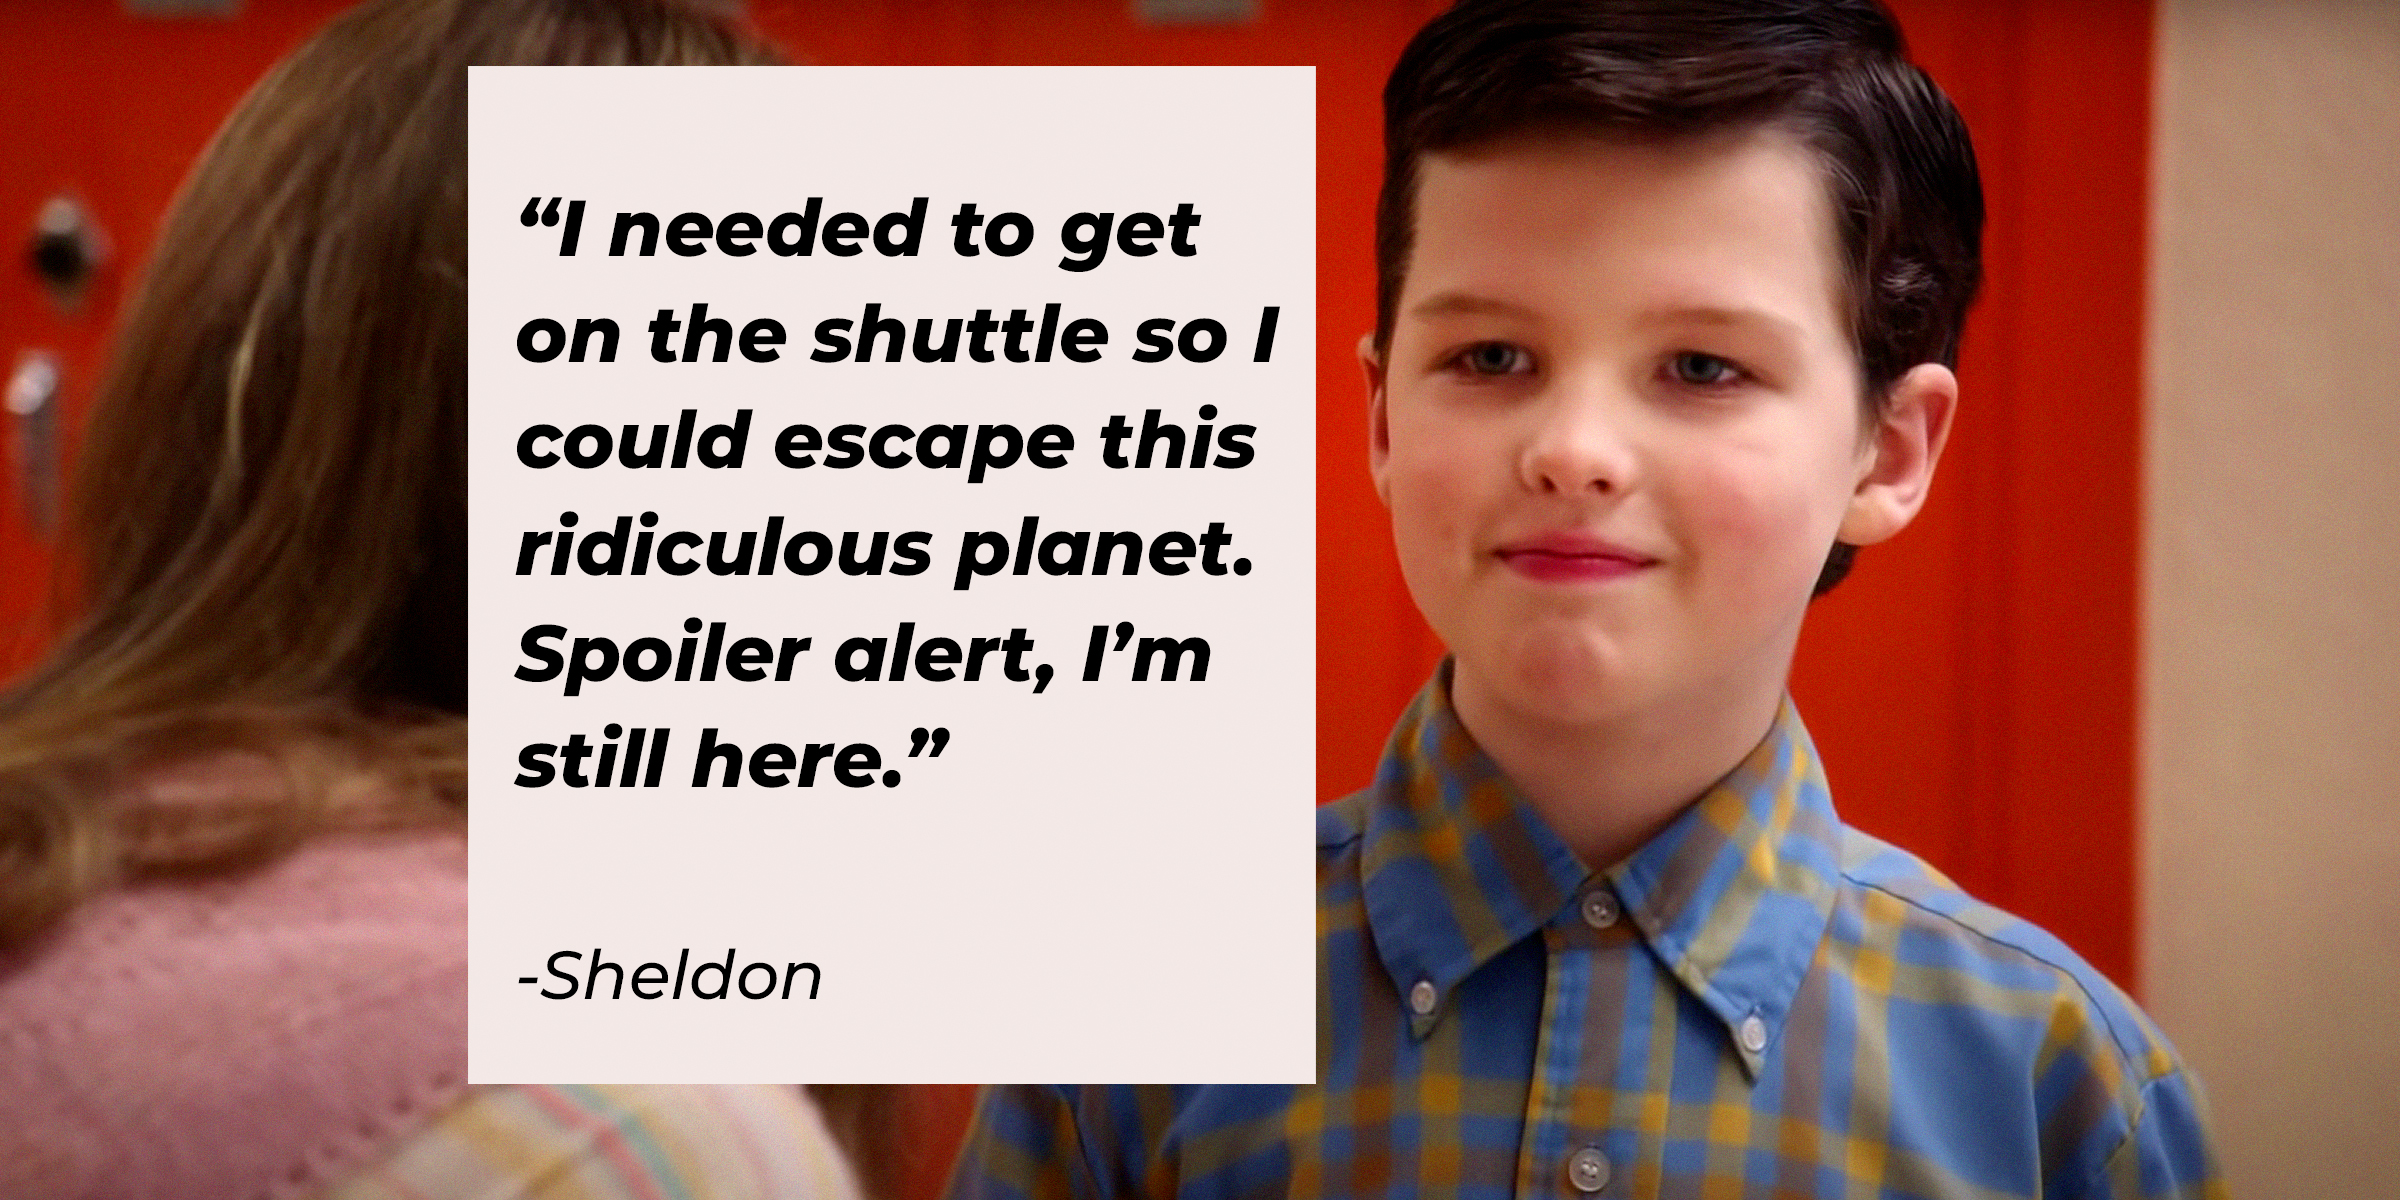 A photo of Sheldon with Sheldon's quote: “I needed to get on the shuttle so I could escape this ridiculous planet. Spoiler alert, I’m still here.” | Source: facebook.com/YoungSheldonCBS